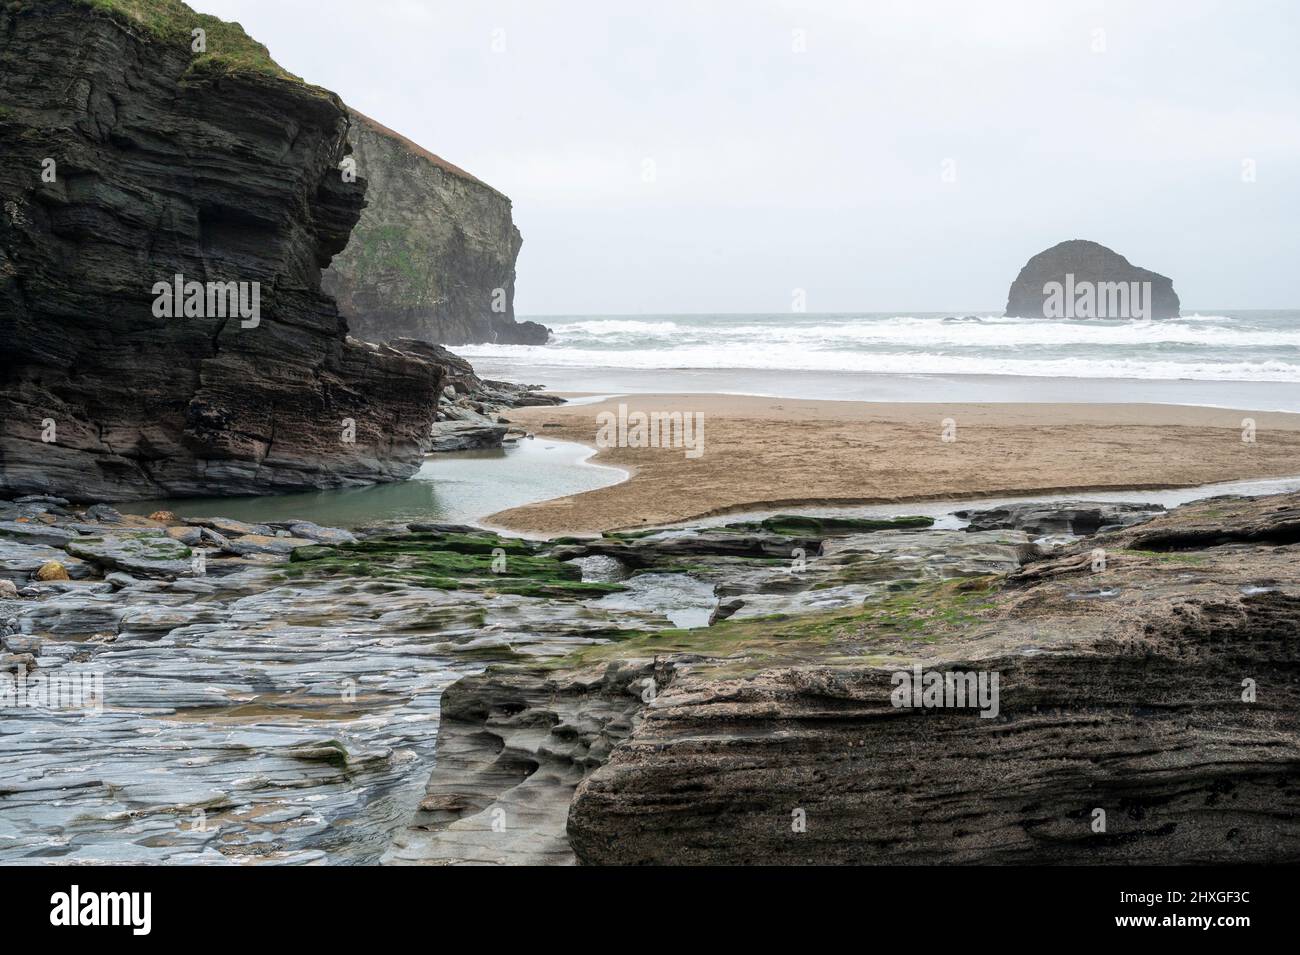 Trebarwith Strand beach in winter with Gull Rock Island, cliffs and empty beach. Stock Photo